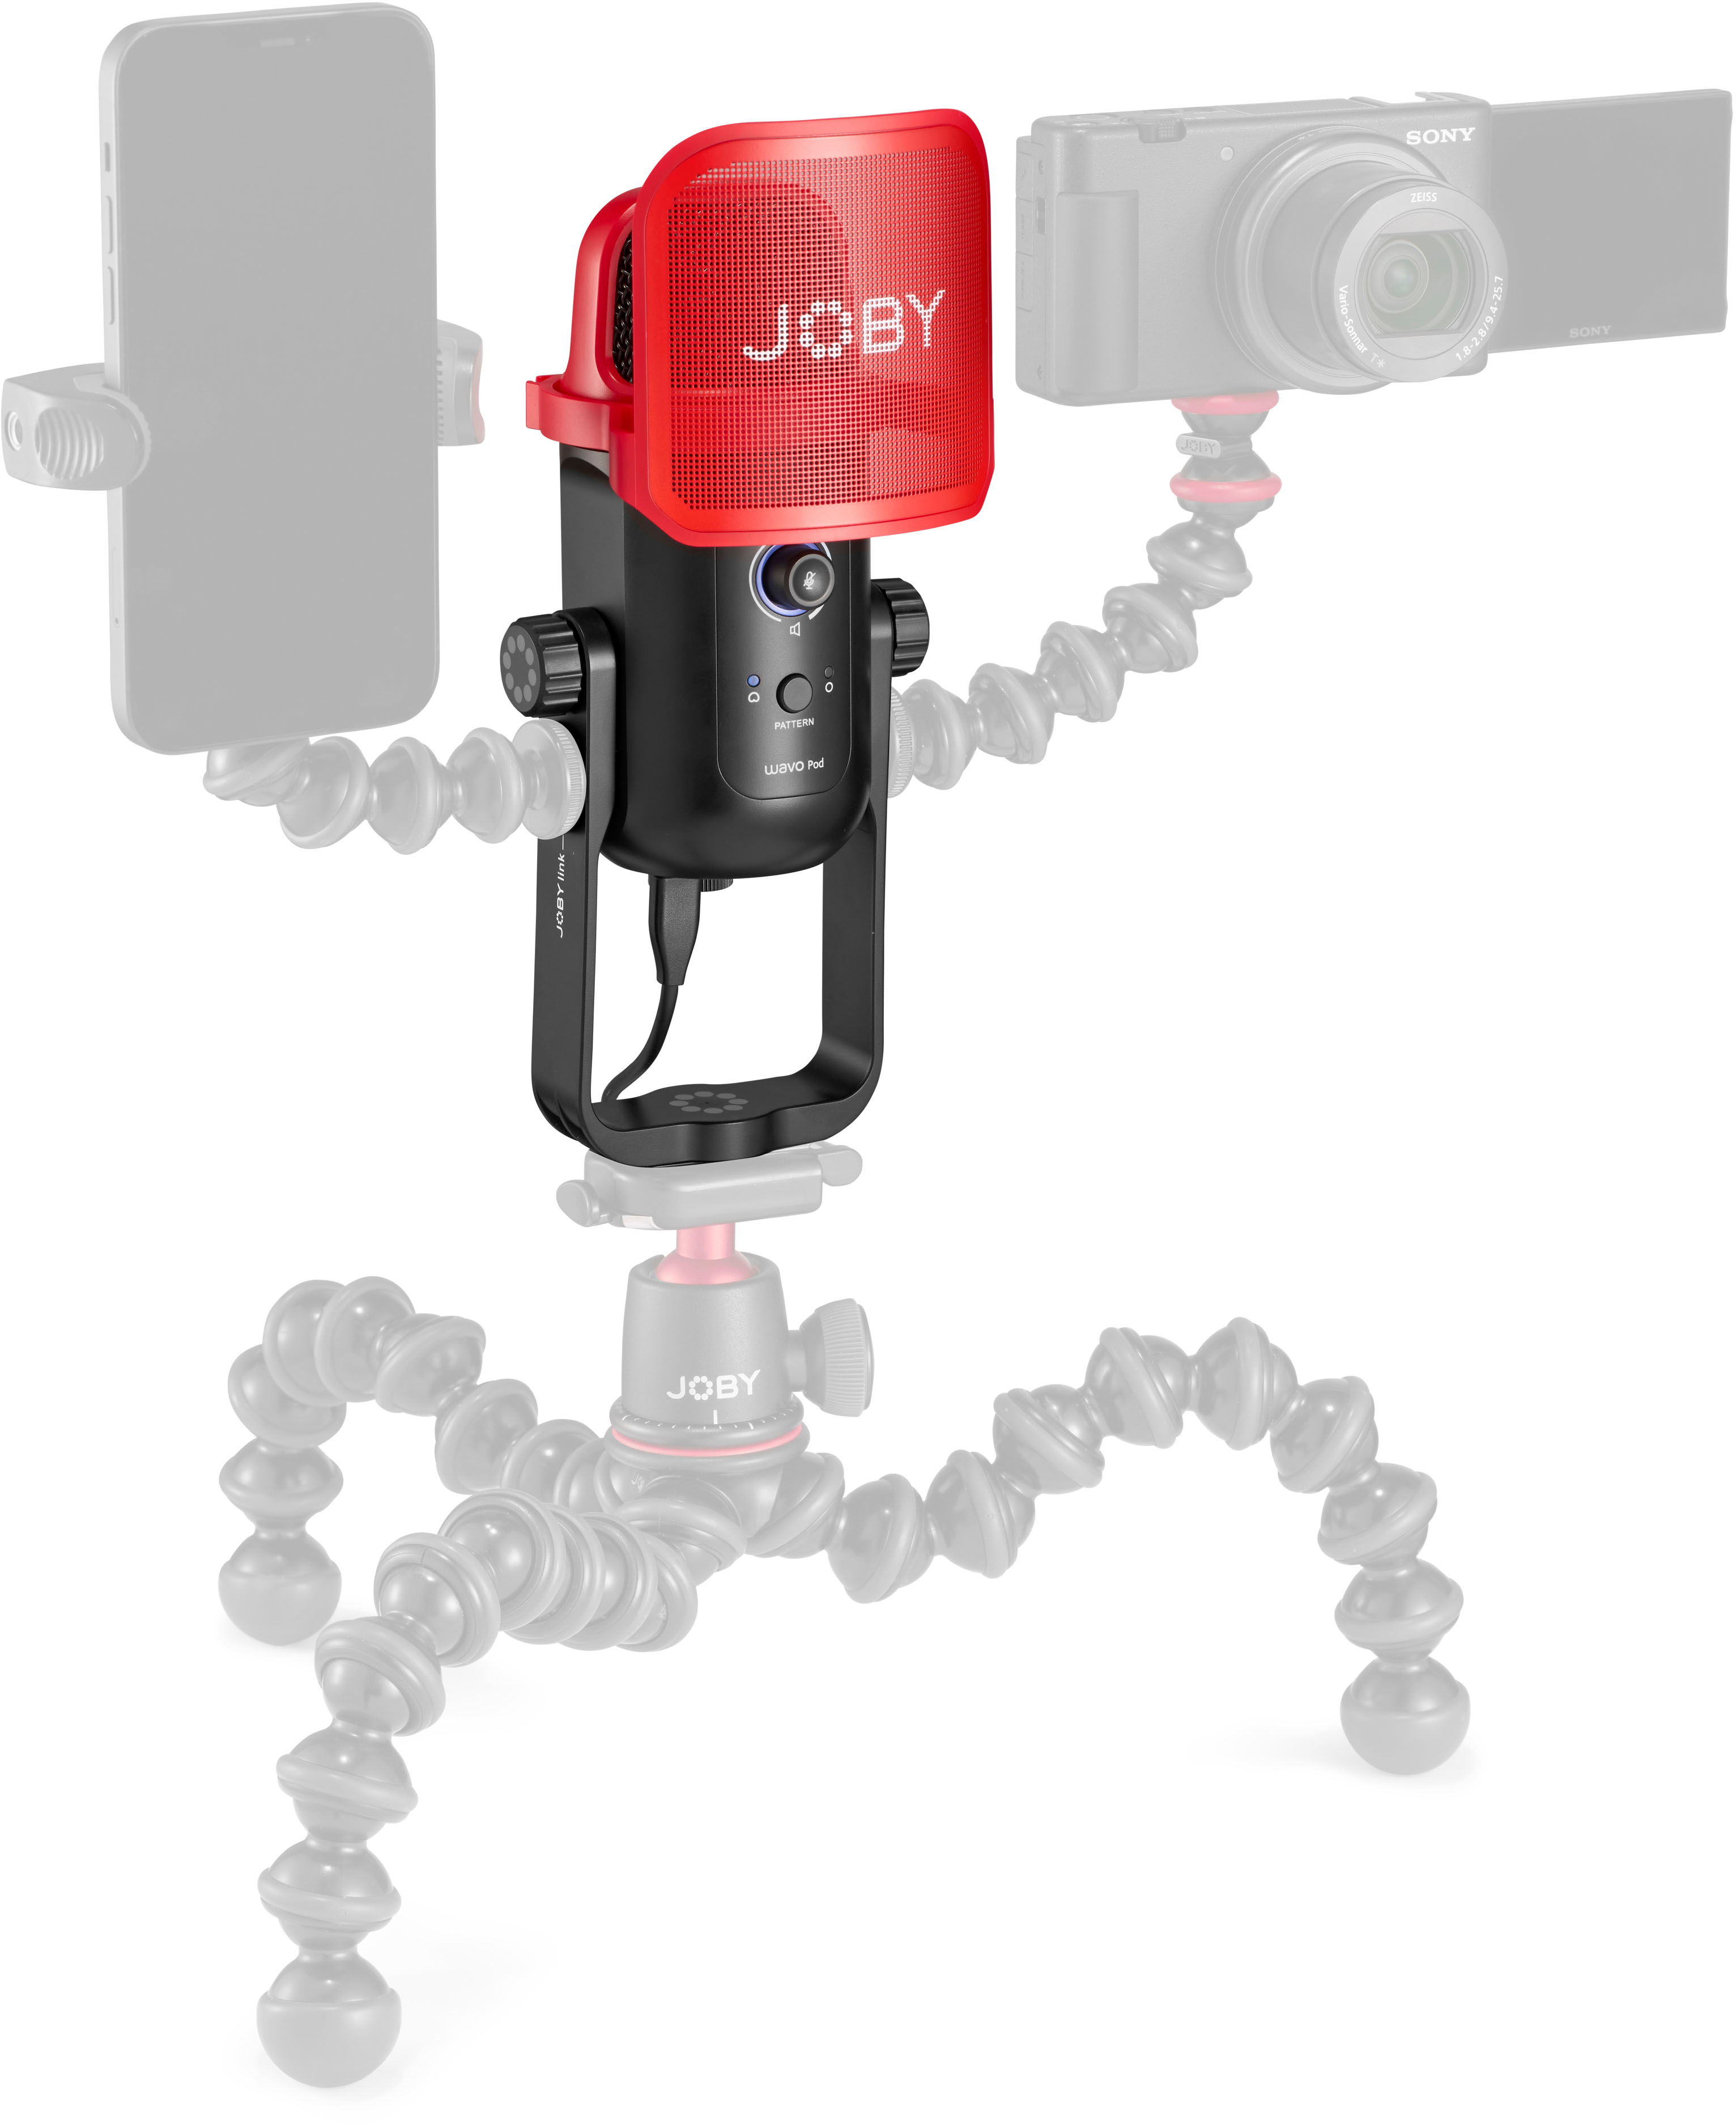 Angle View: JOBY - Wavo Pod Wired USB Microphone Vlogging Kit